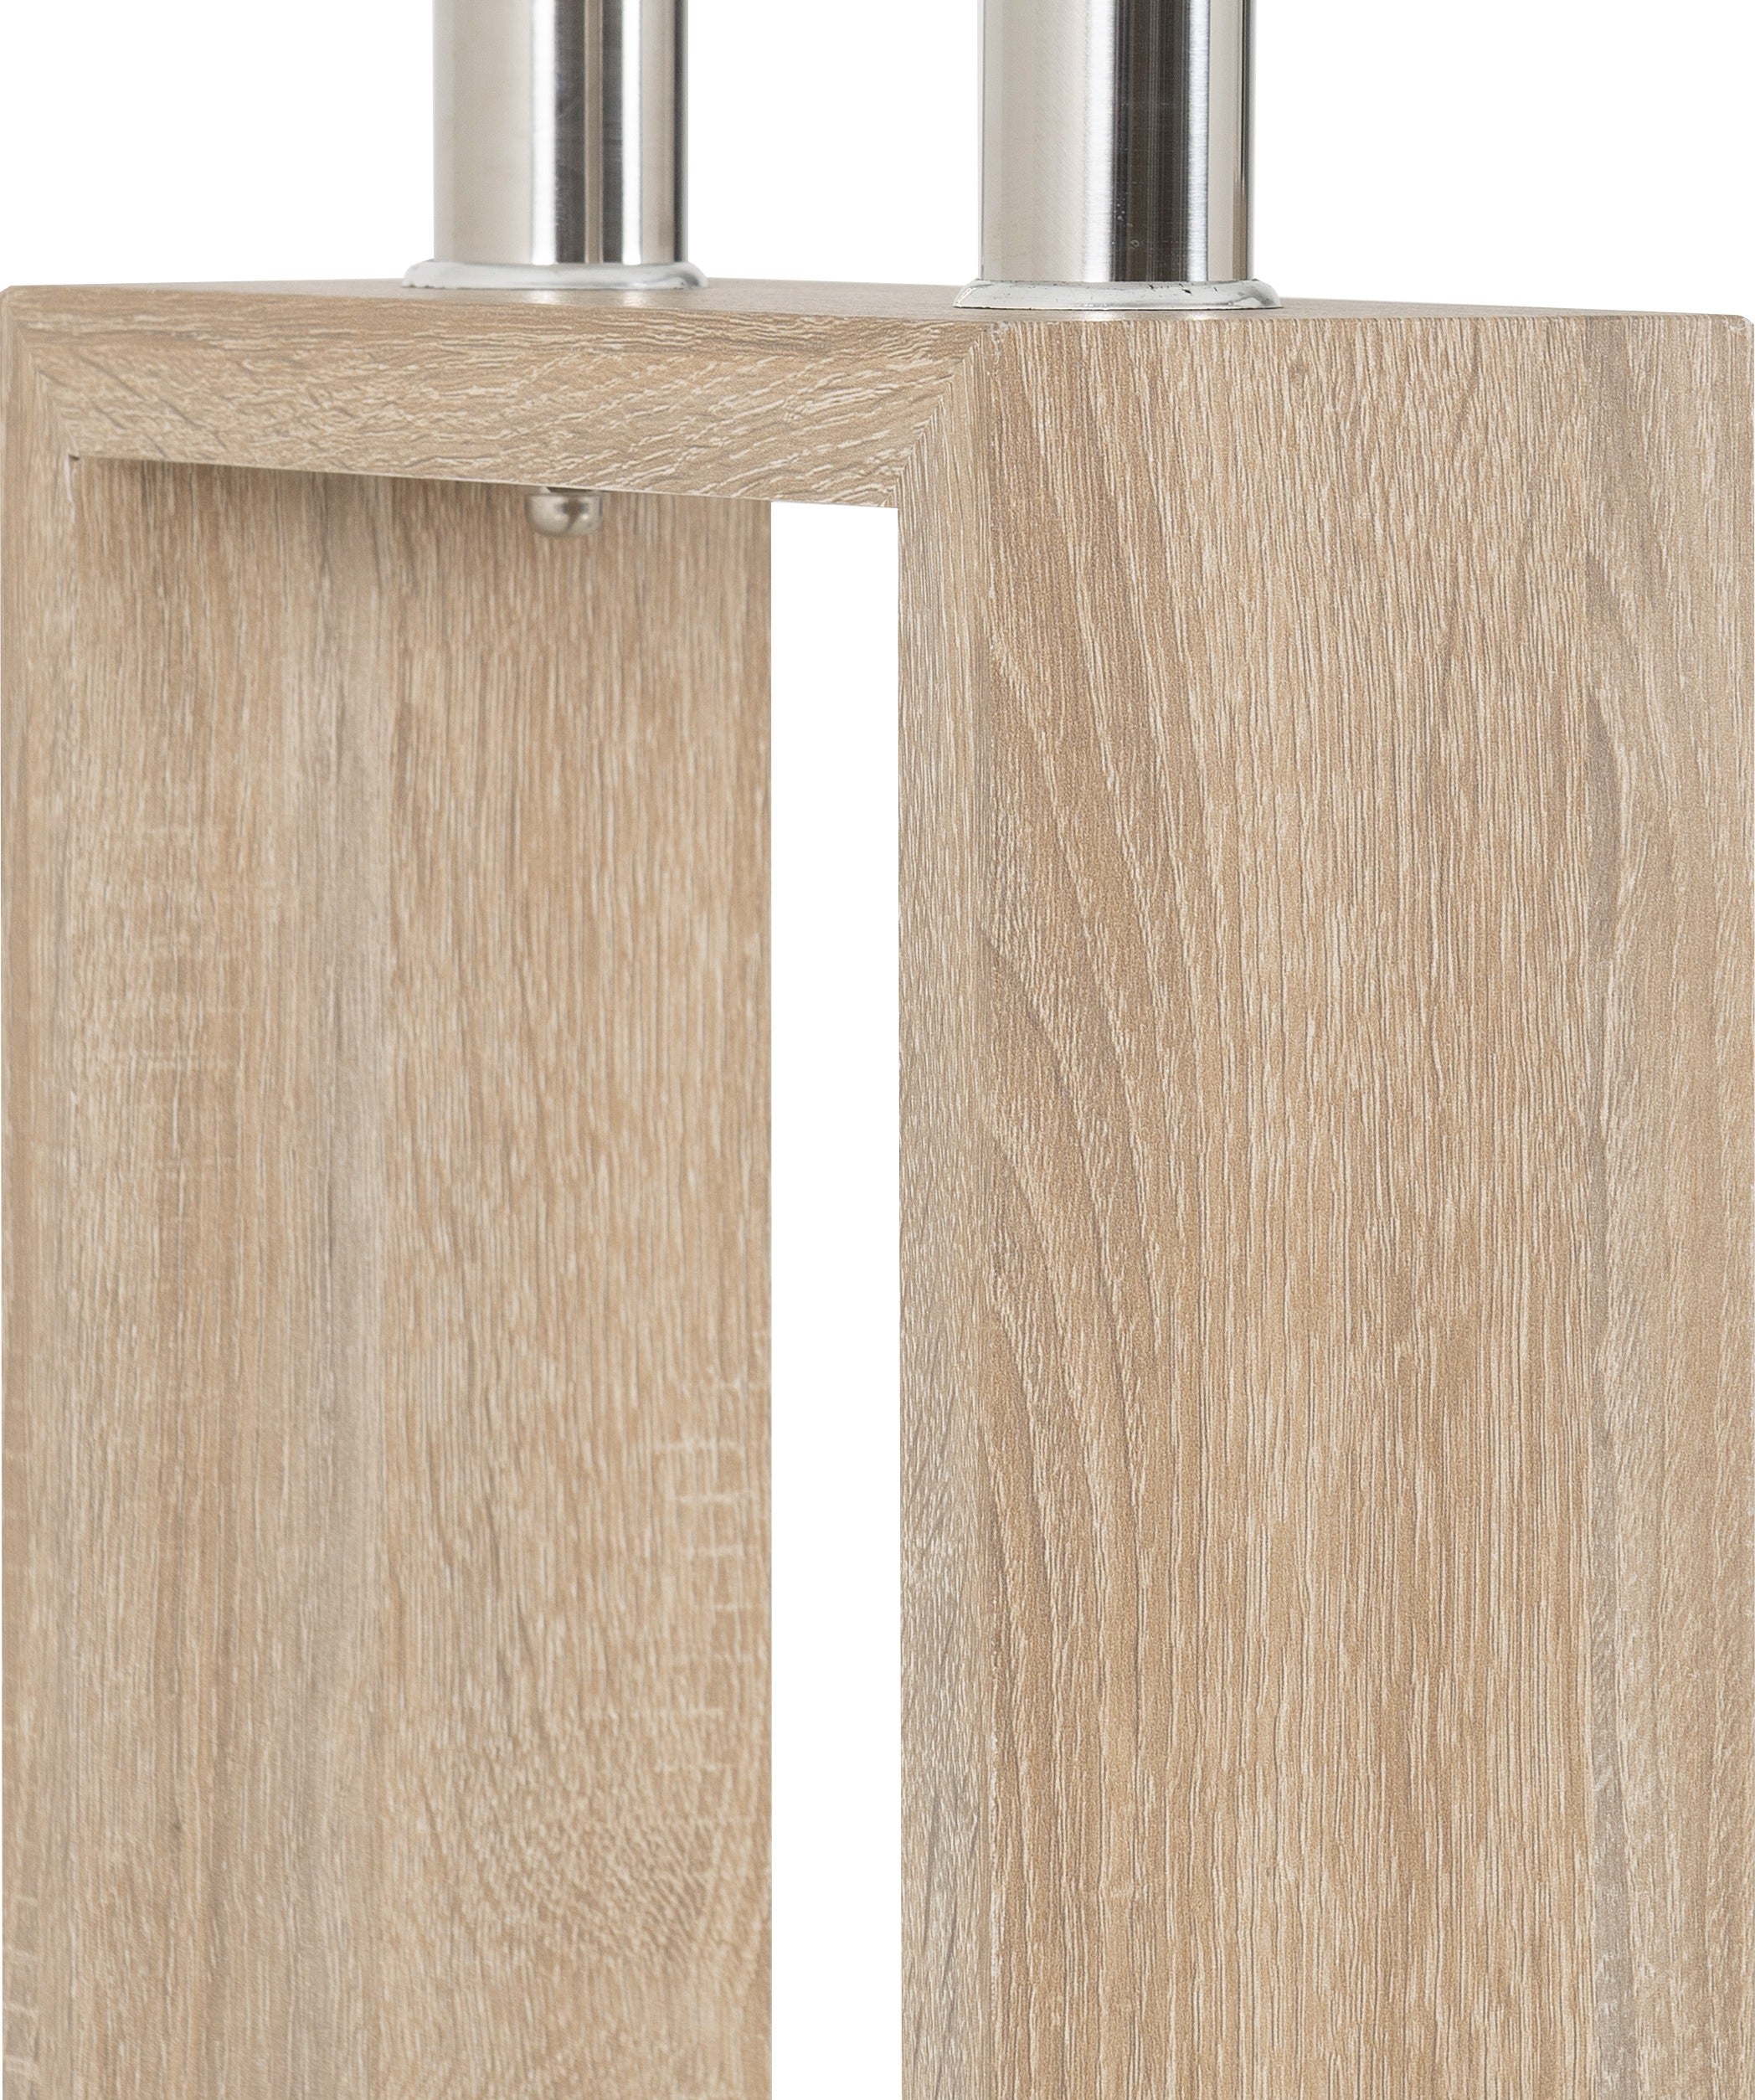 Milan Console Table in Oak Effect Glass and Silver